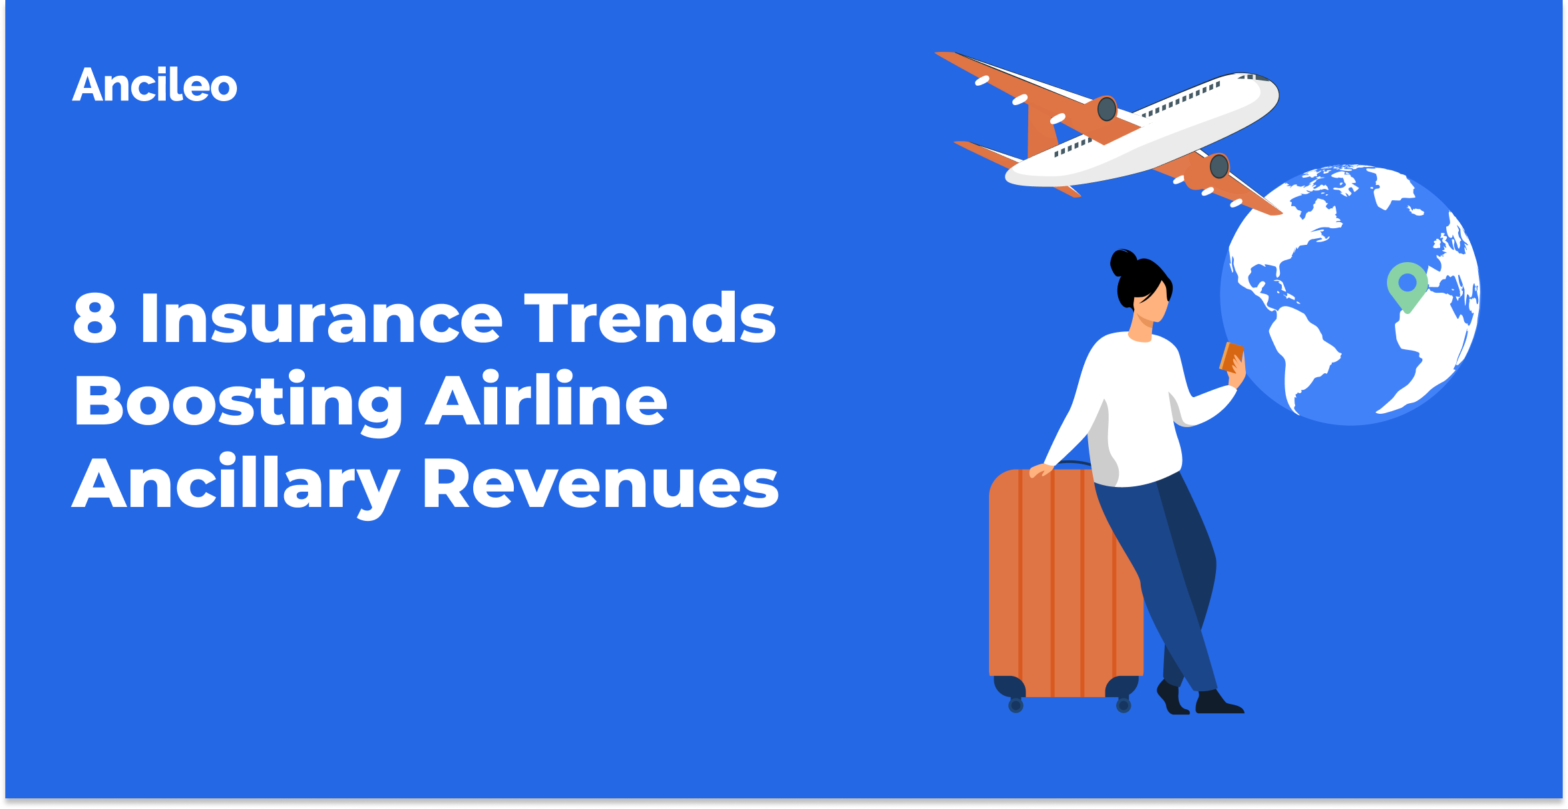 8 Insurance Trends Boosting Airline Ancillary Revenues